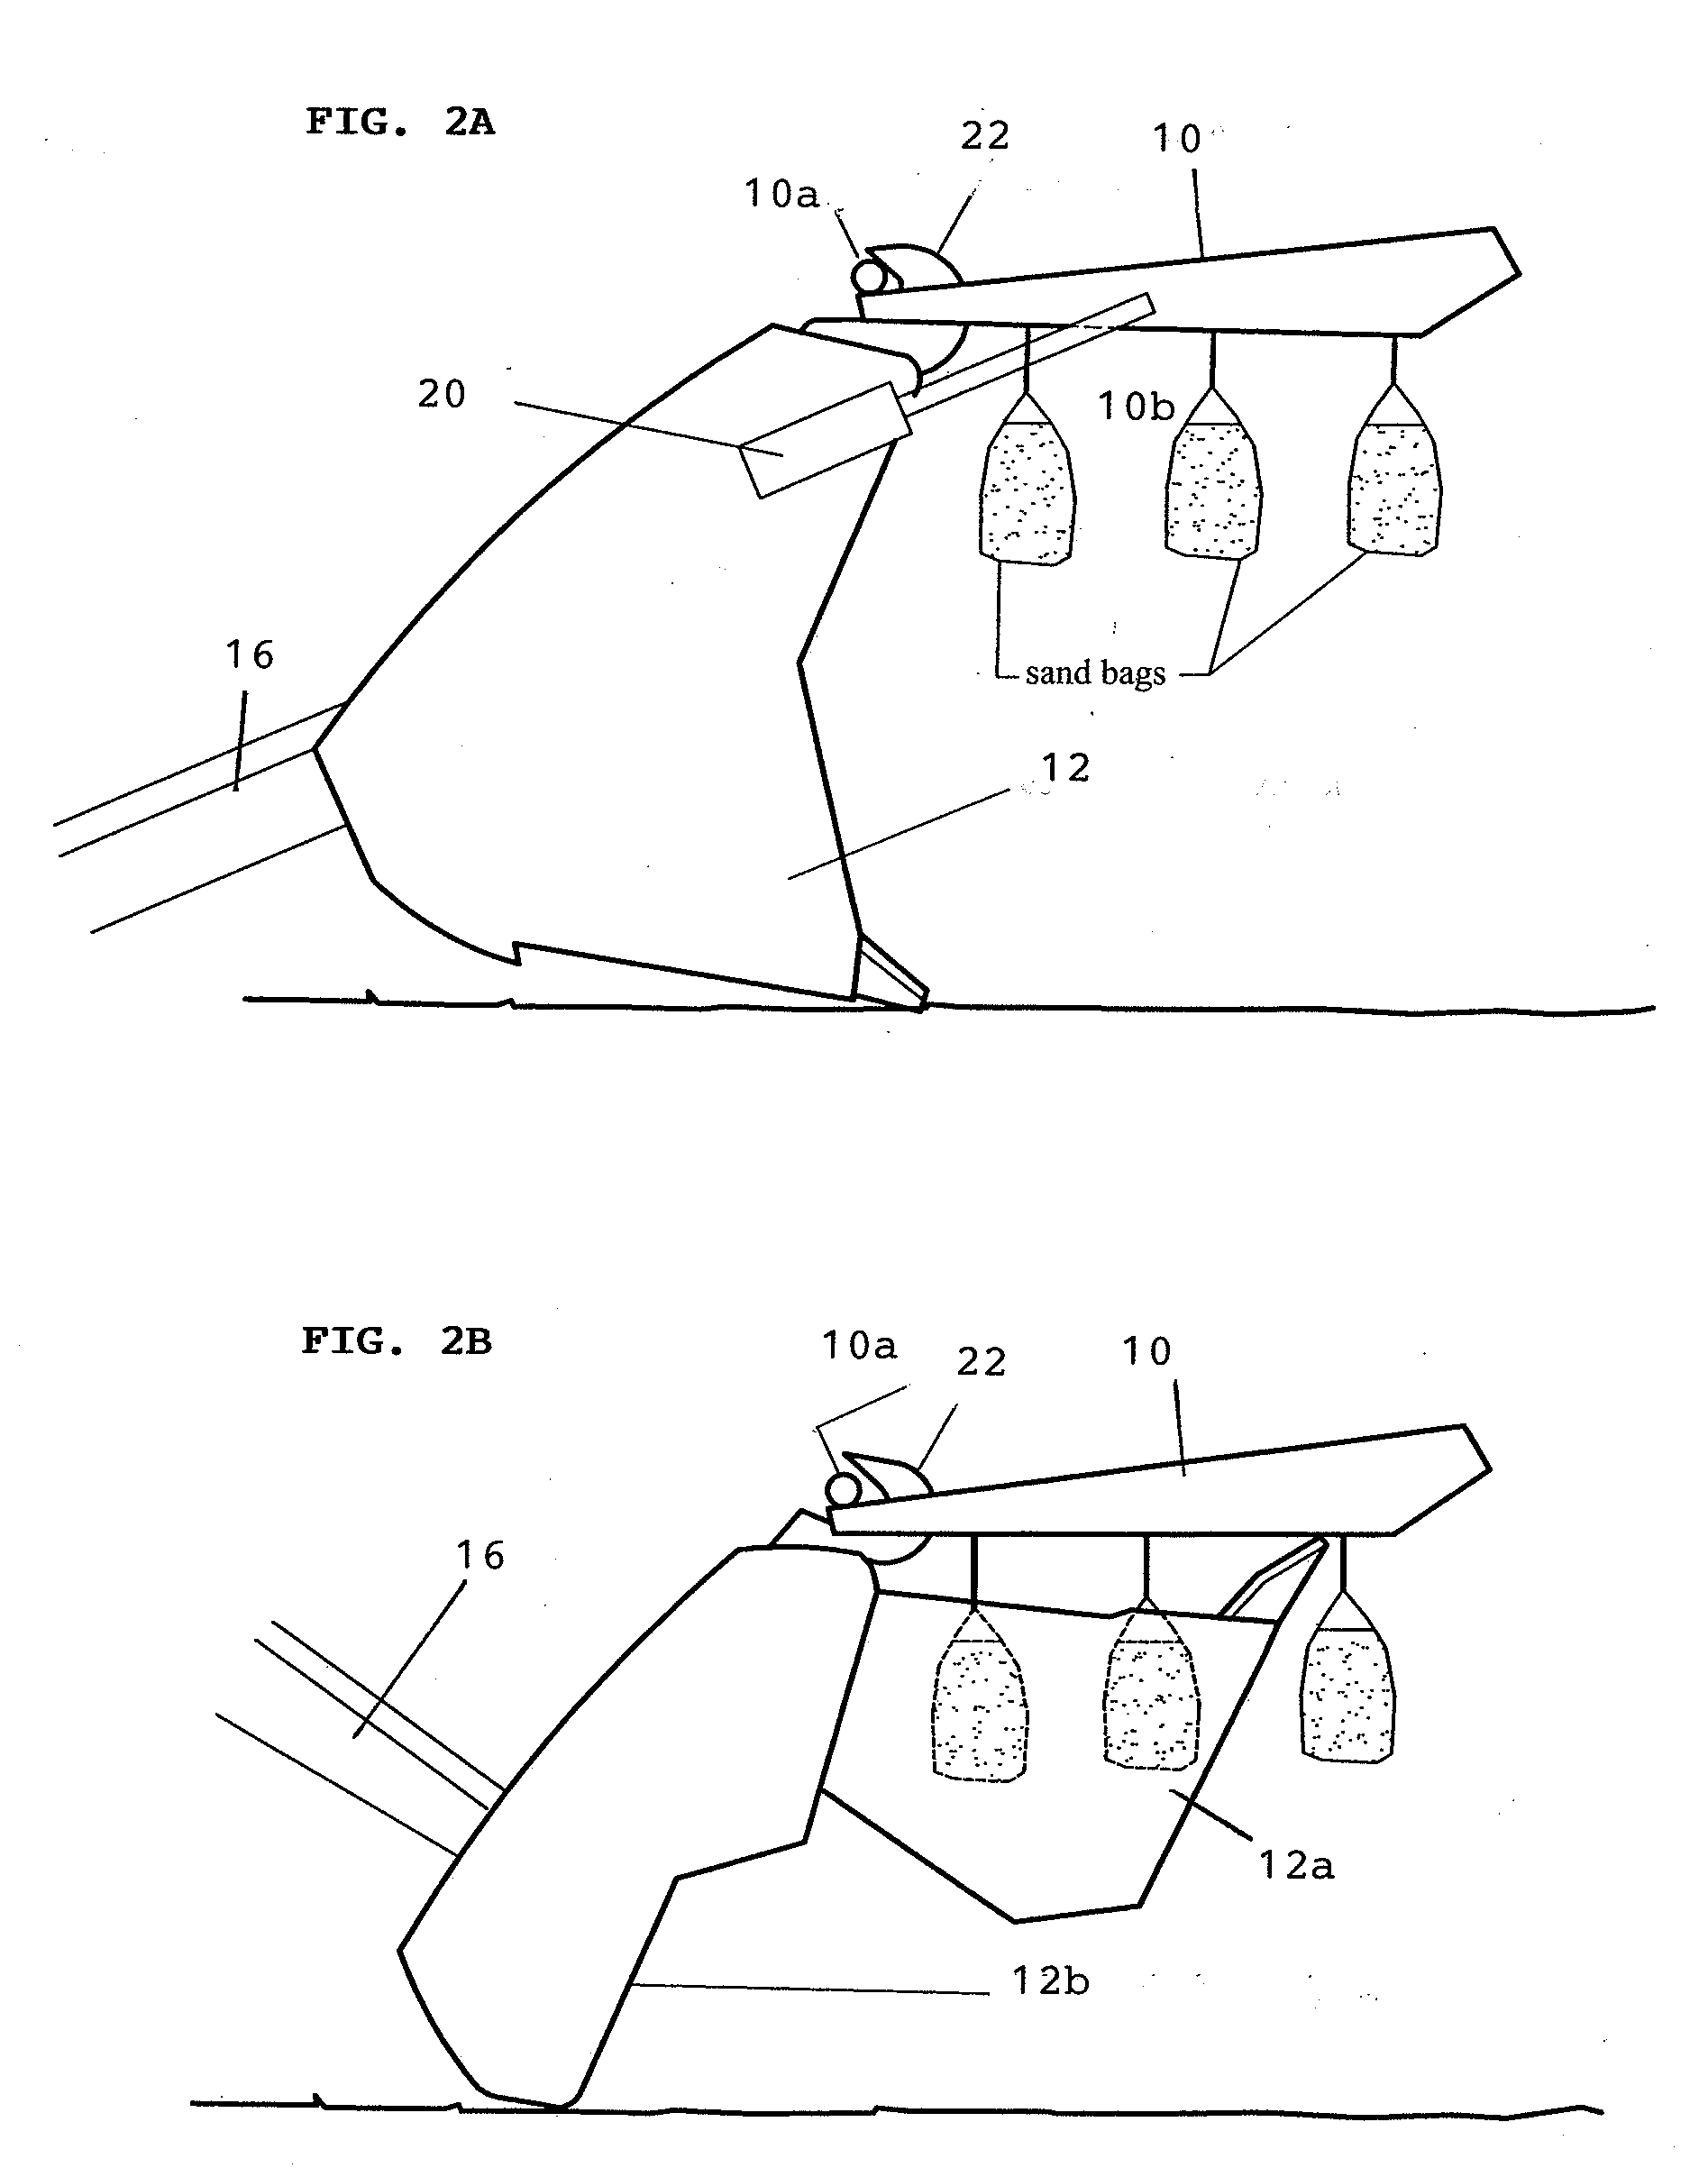 Device & method for filling multiple sandbags at a time